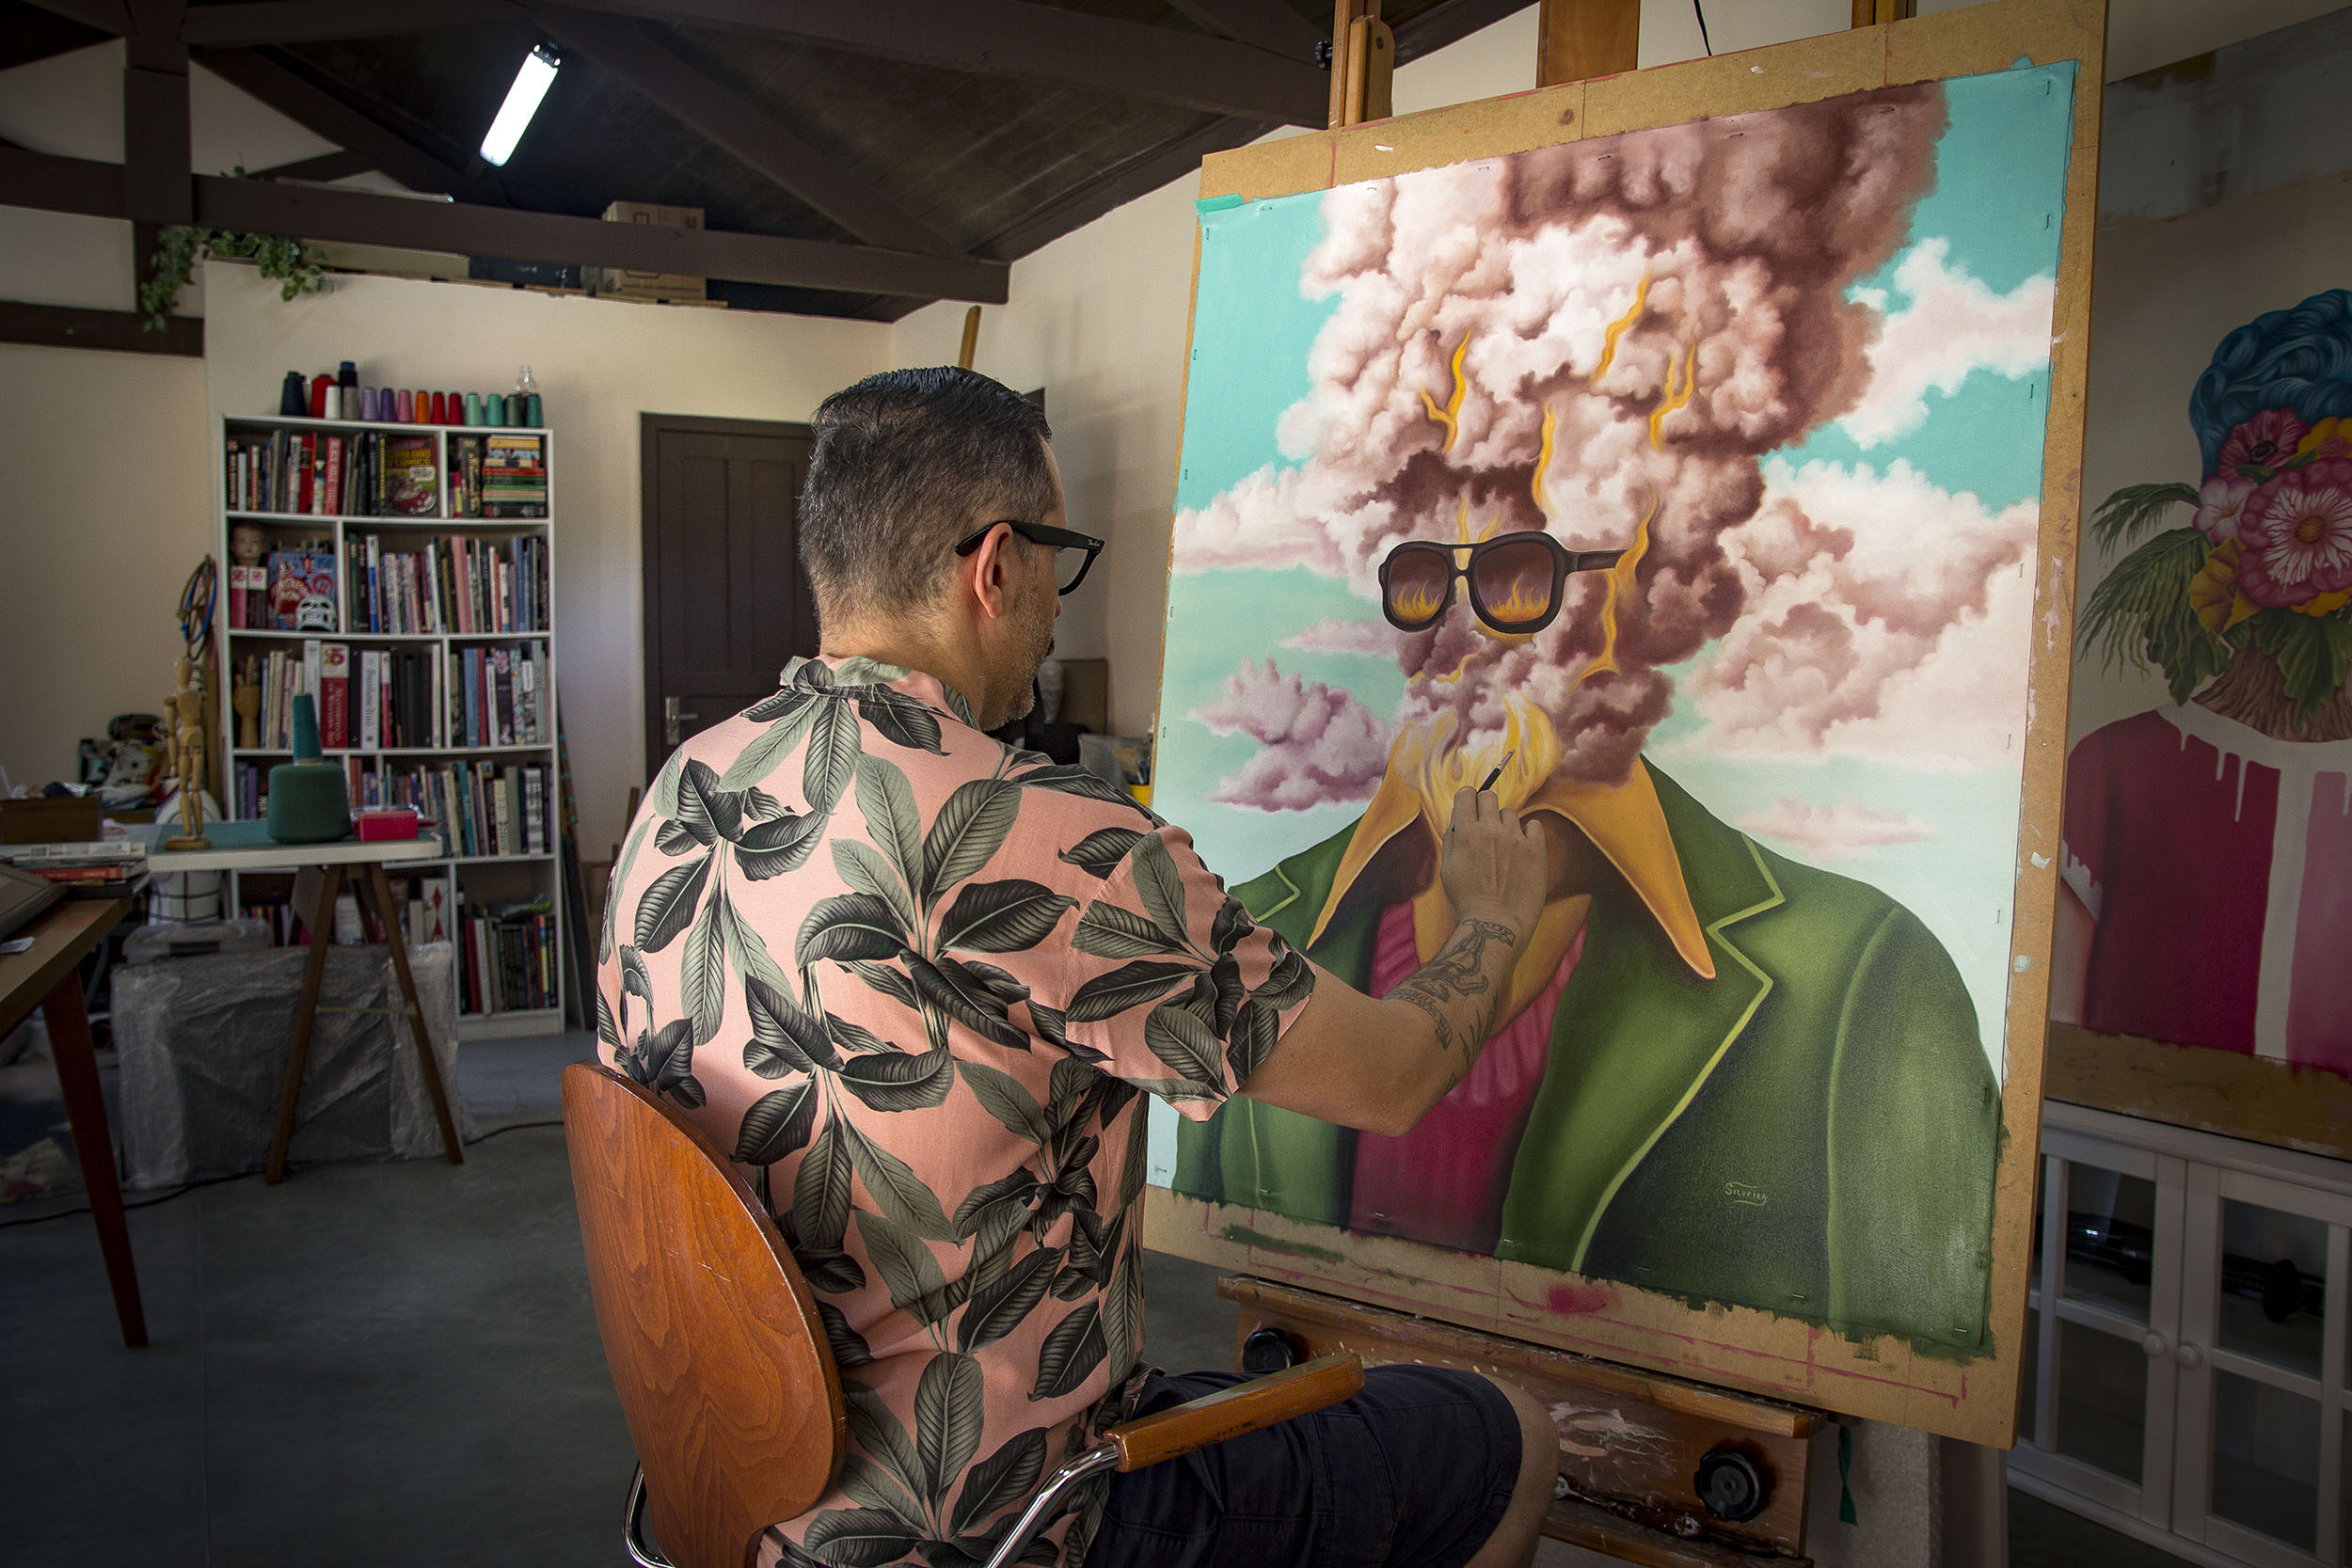 An artist painting in their studio